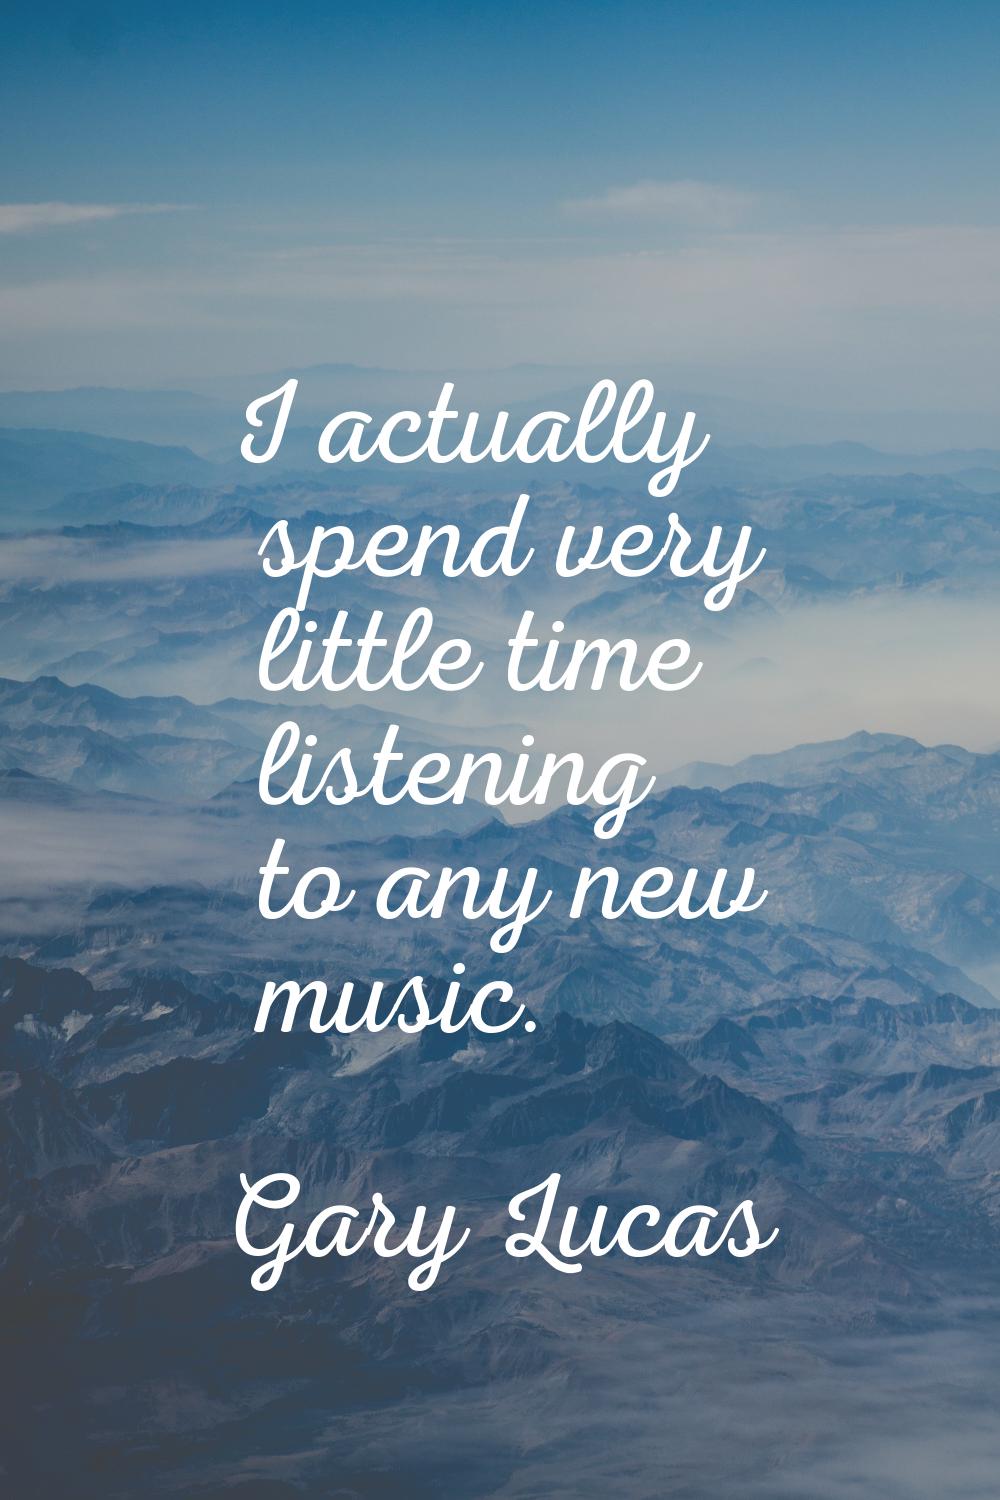 I actually spend very little time listening to any new music.